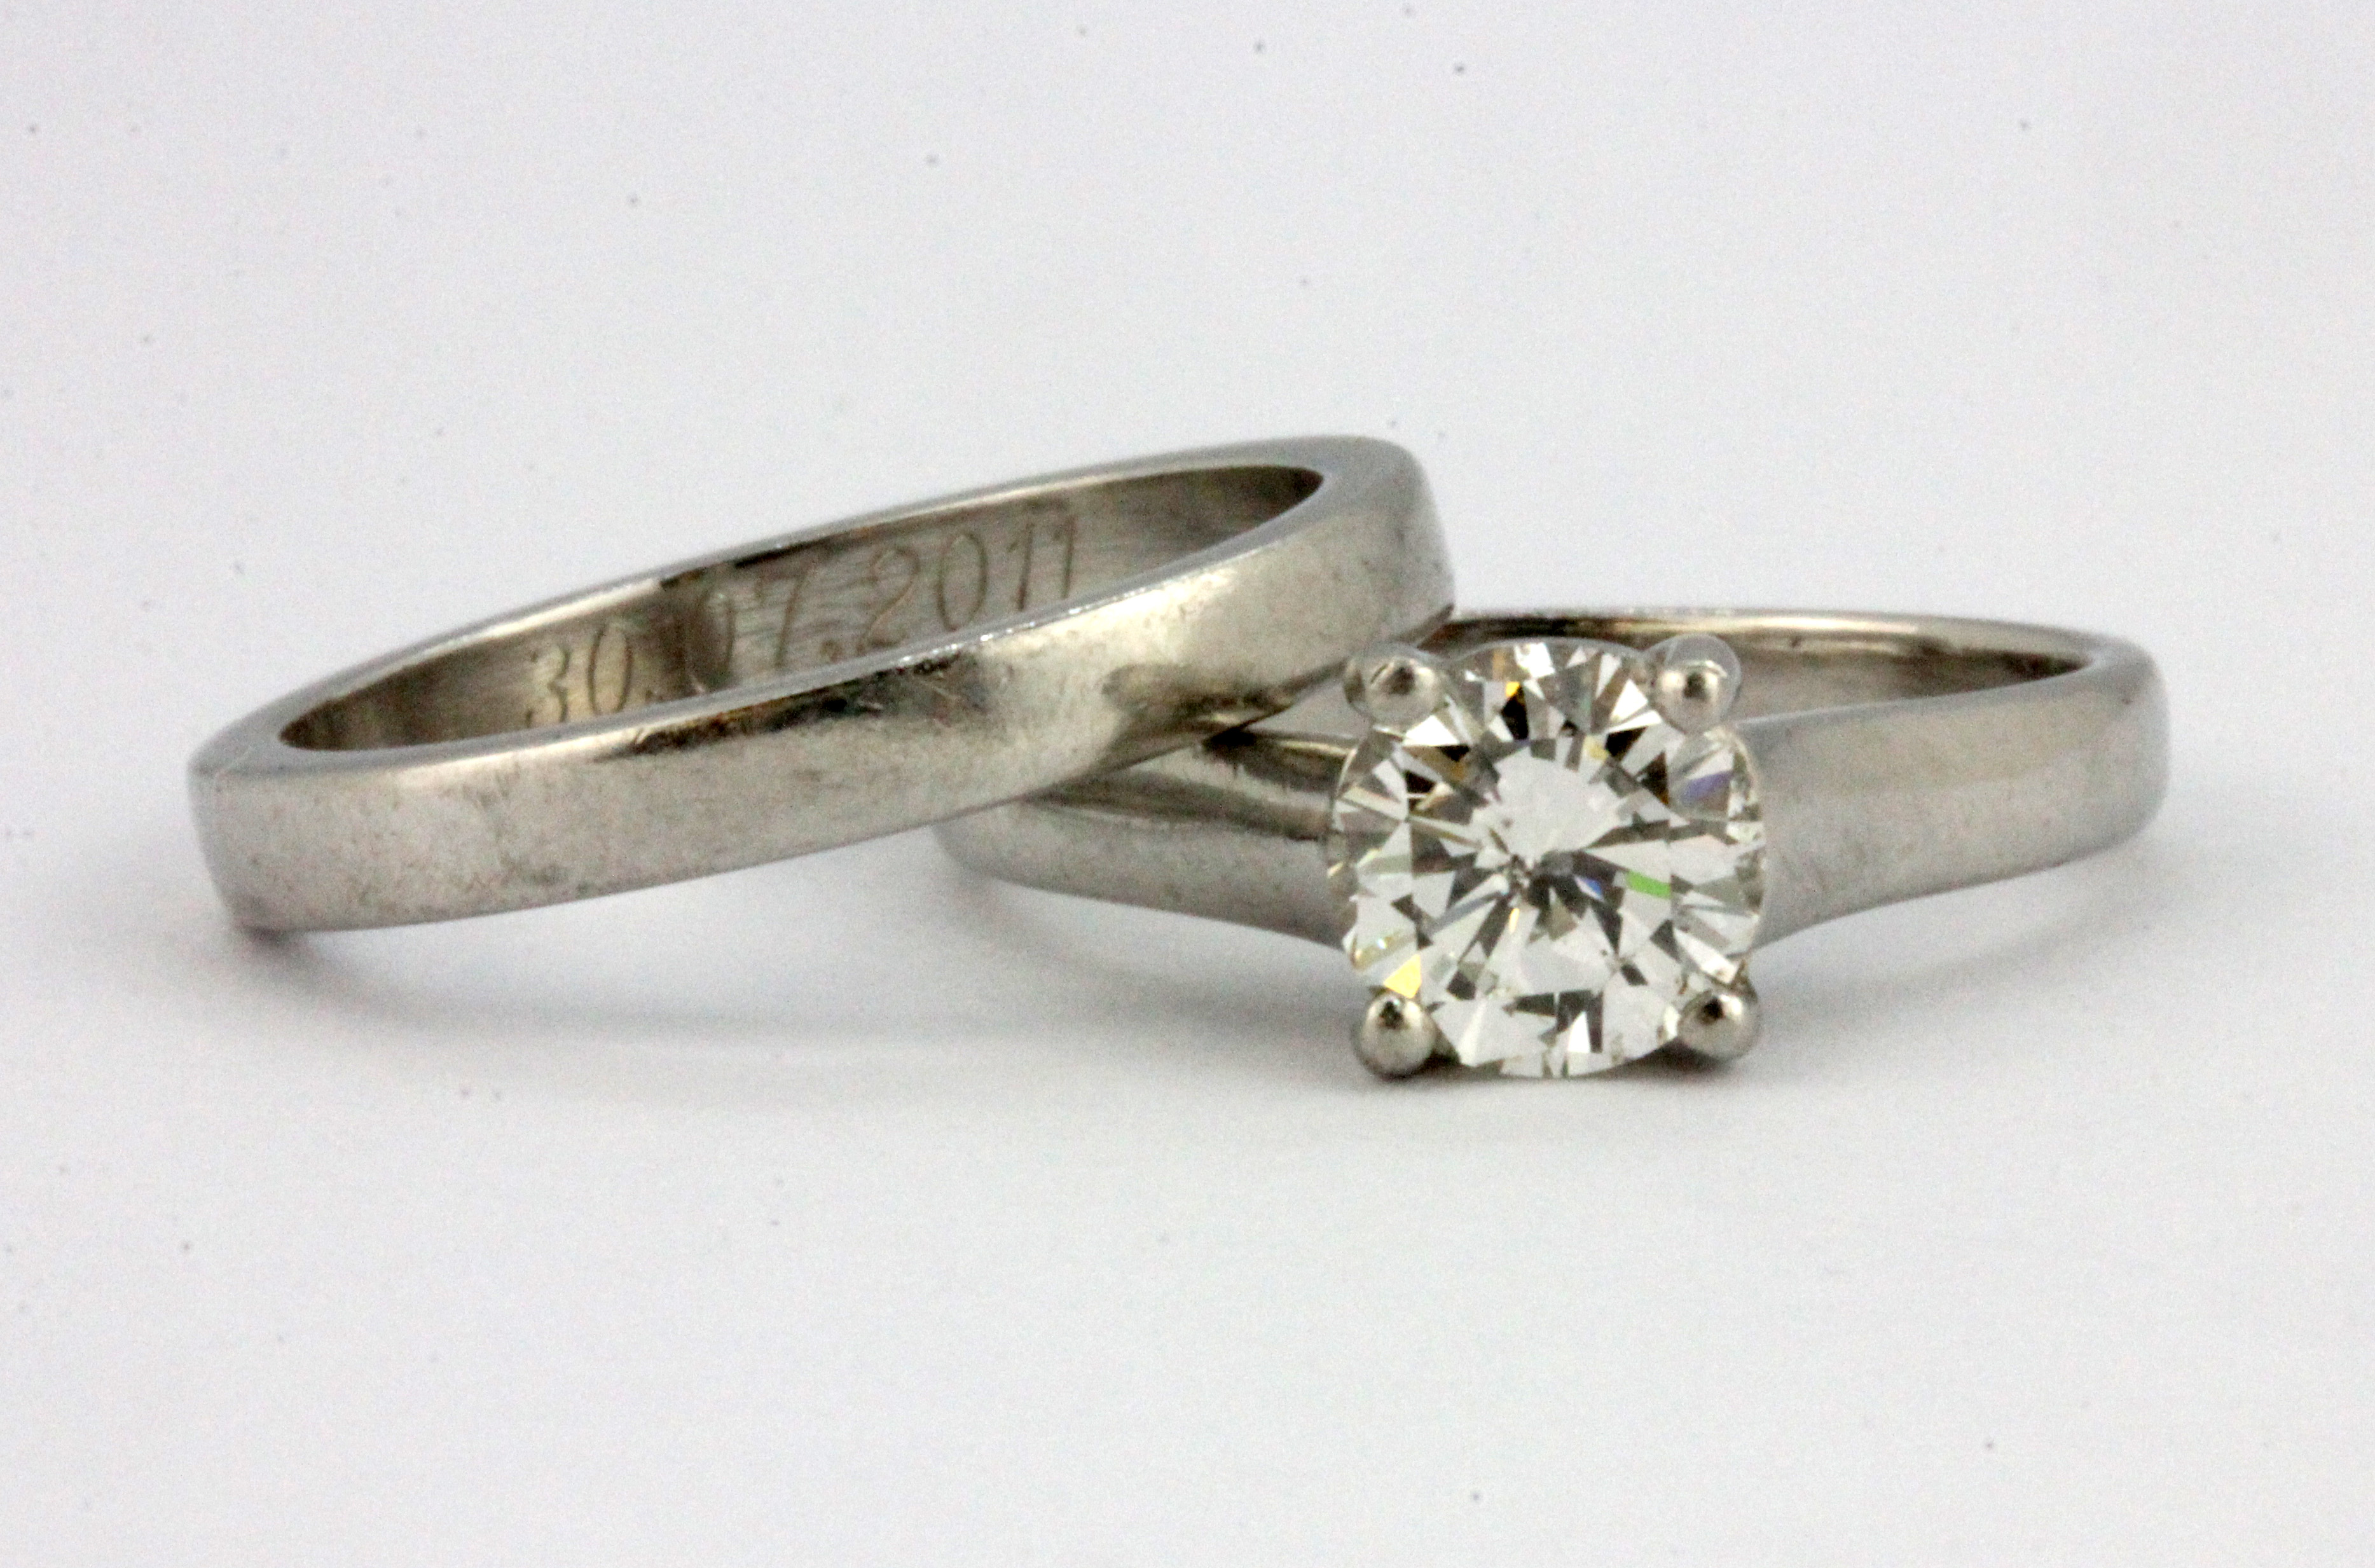 A 950 platinum brilliant cut diamond solitaire ring and matching wedding ring, with valuation for